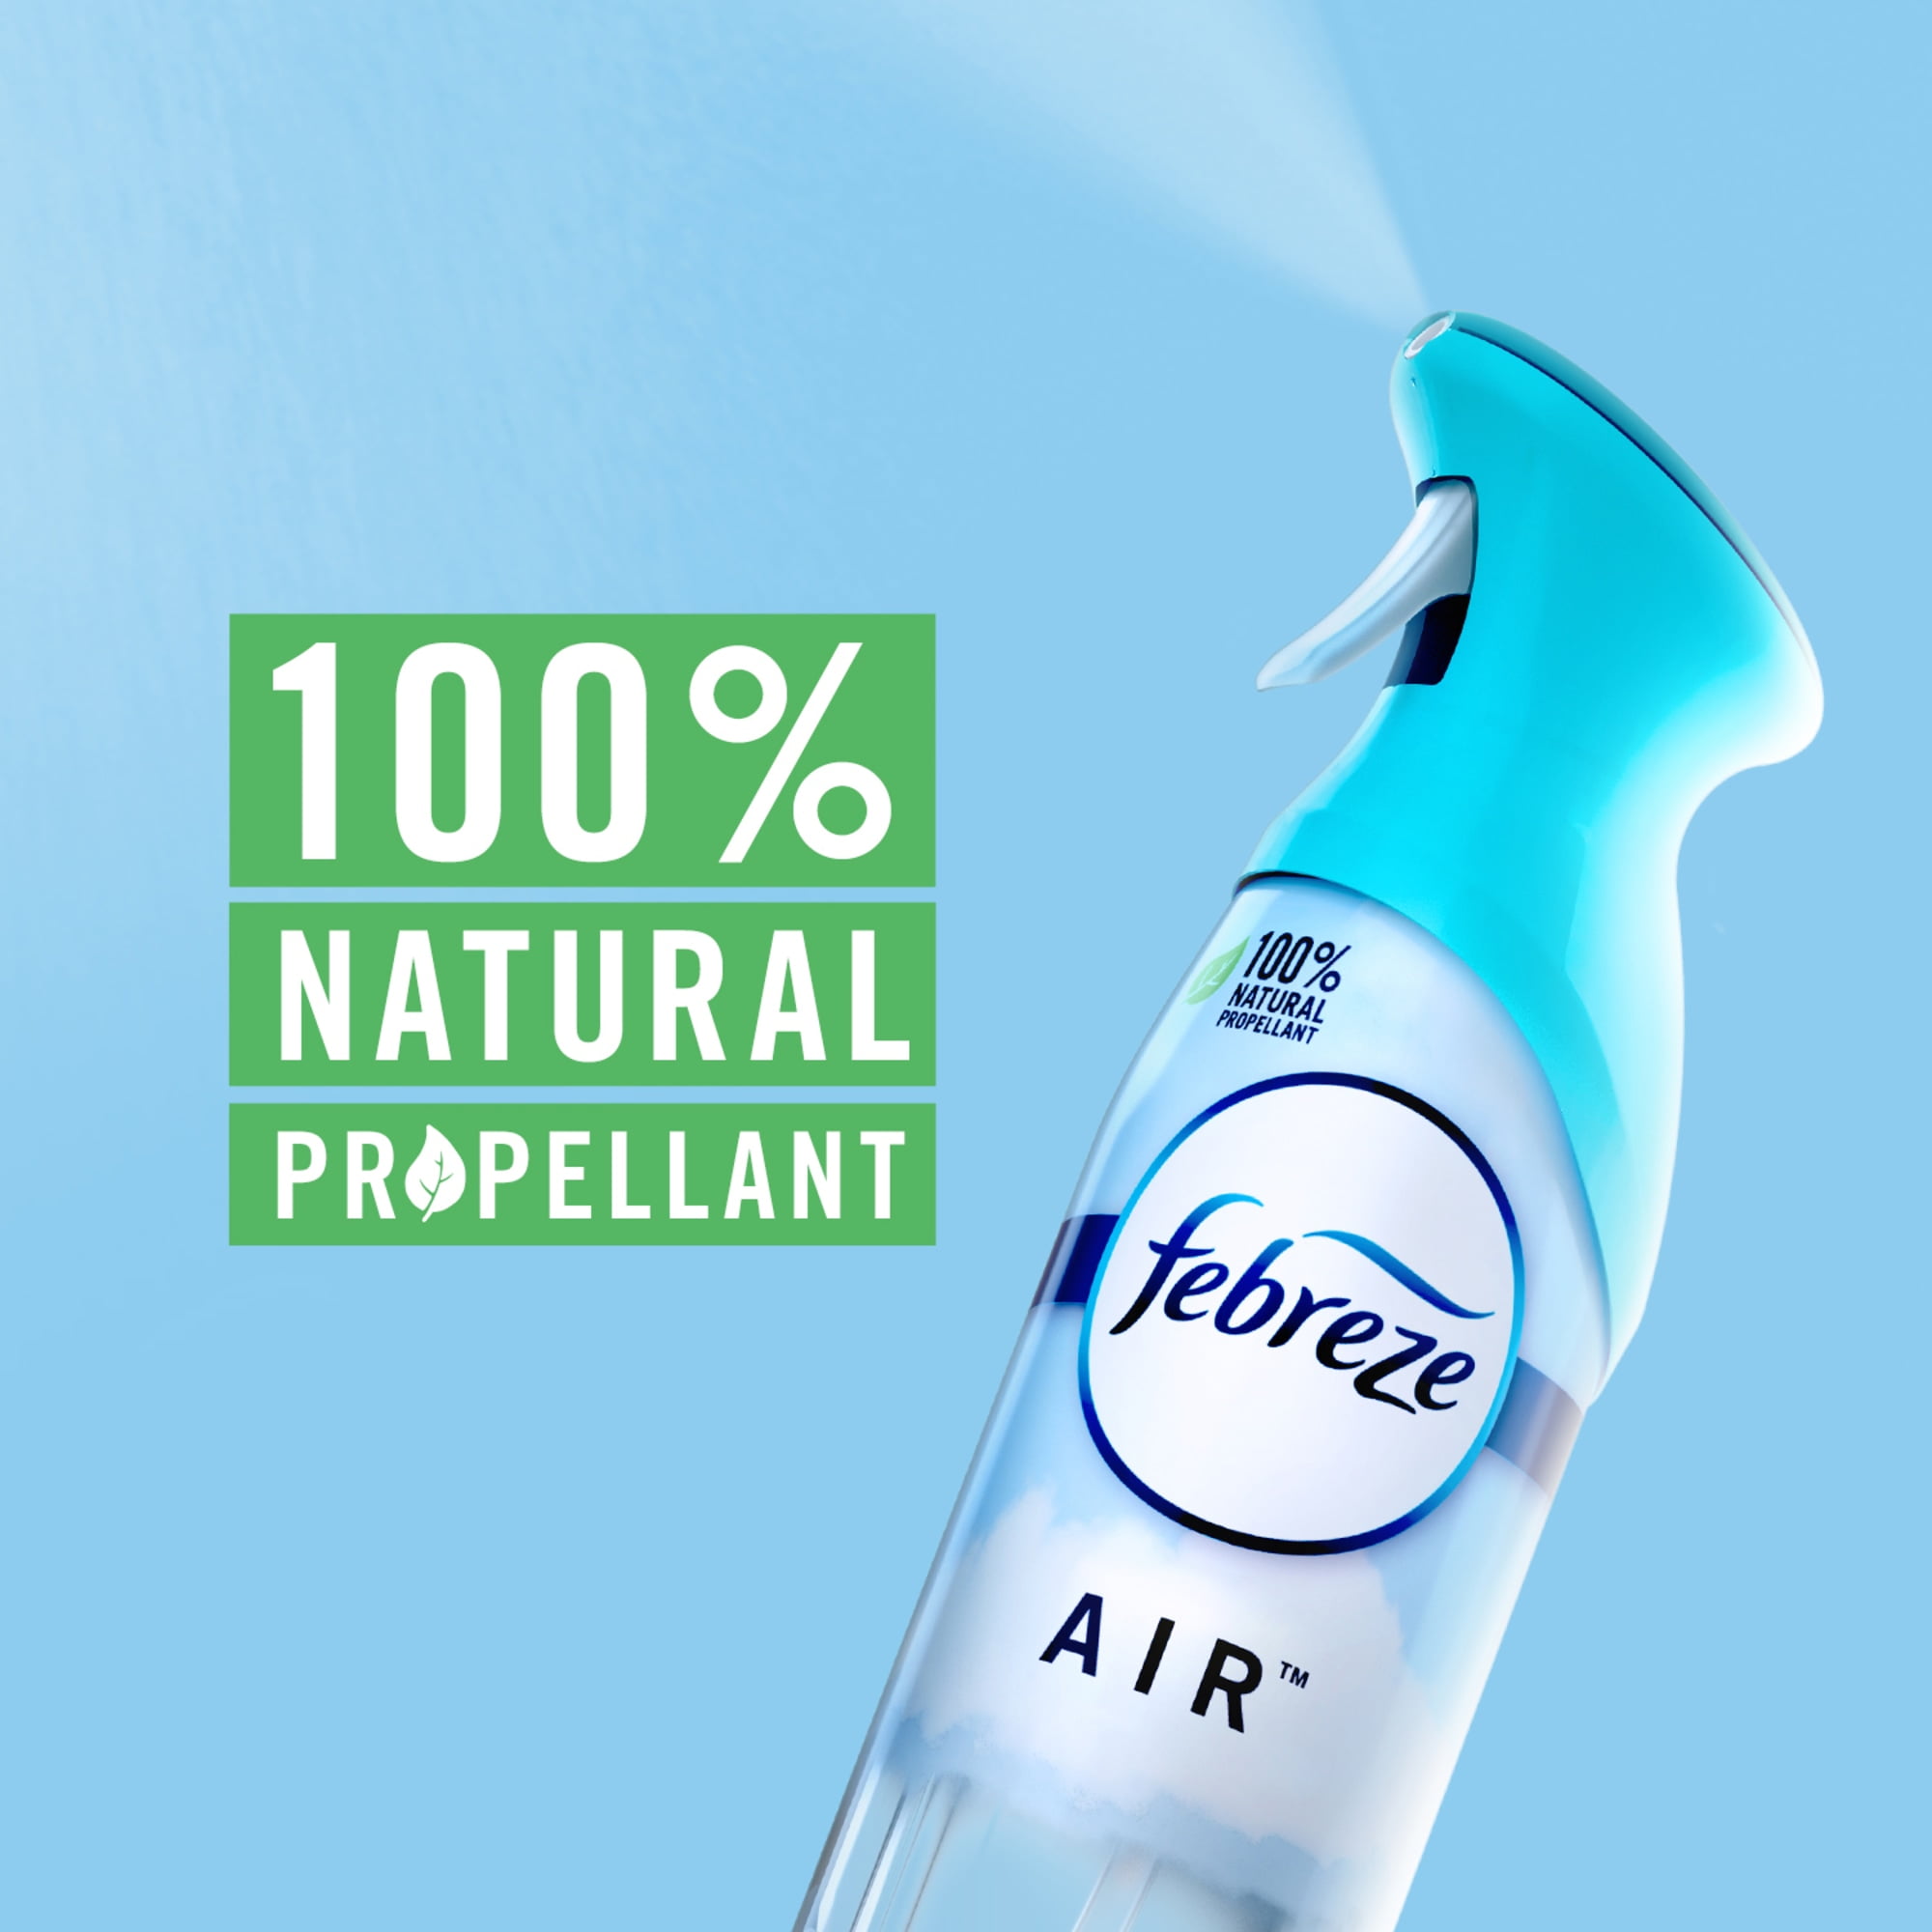 Febreze Air Effects 8.8 Oz. Linen and Sky Scent Air Freshener Spray  (2-Pack) 003700097799 - The Home Depot